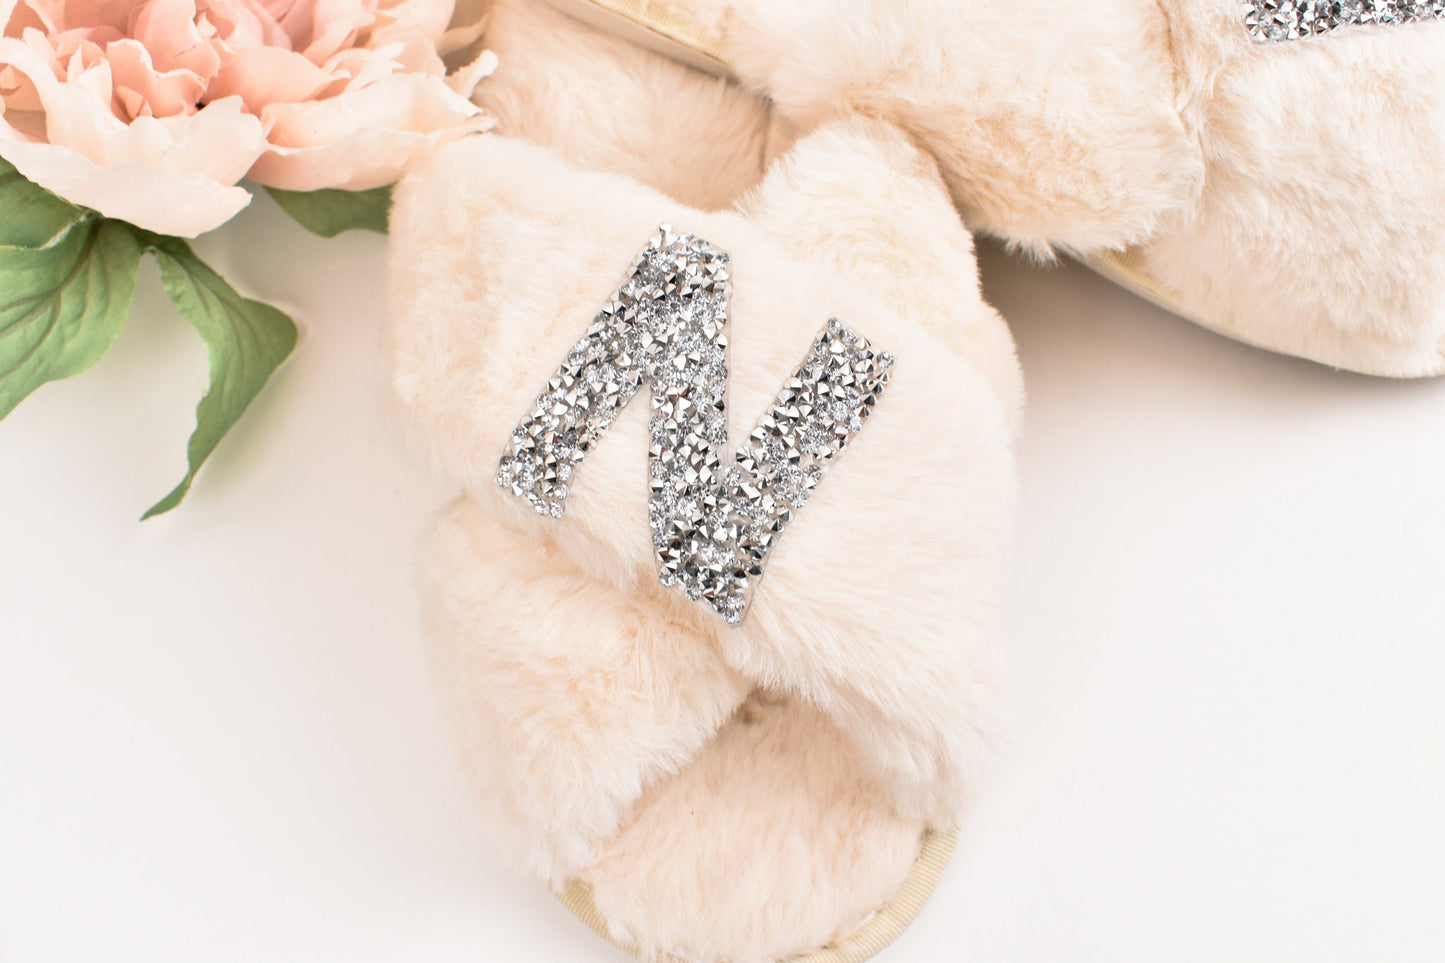 Bride Bridesmaid Slippers - Bachelorette Party - Personalized Bridal Slipper - Bridal Shower Gift - Bridesmaid Gift - Wedding Gift -BIRTHDAY